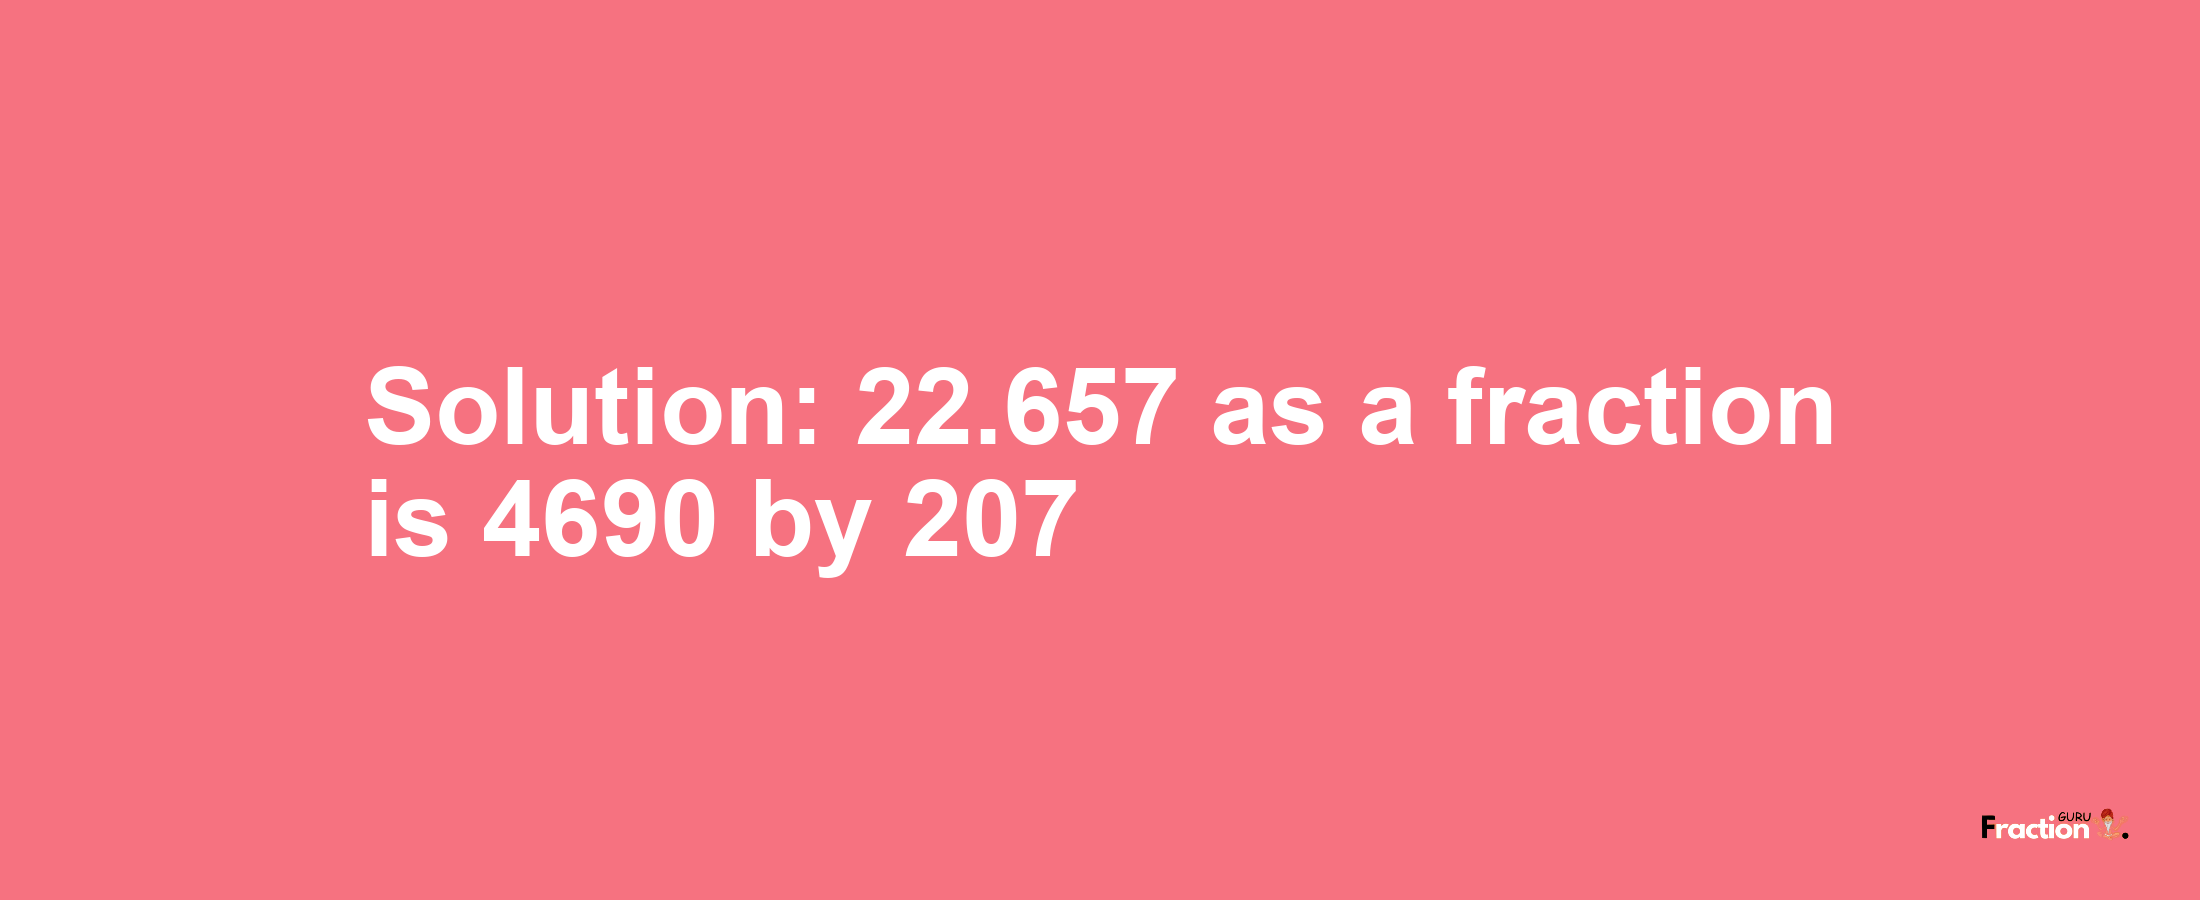 Solution:22.657 as a fraction is 4690/207